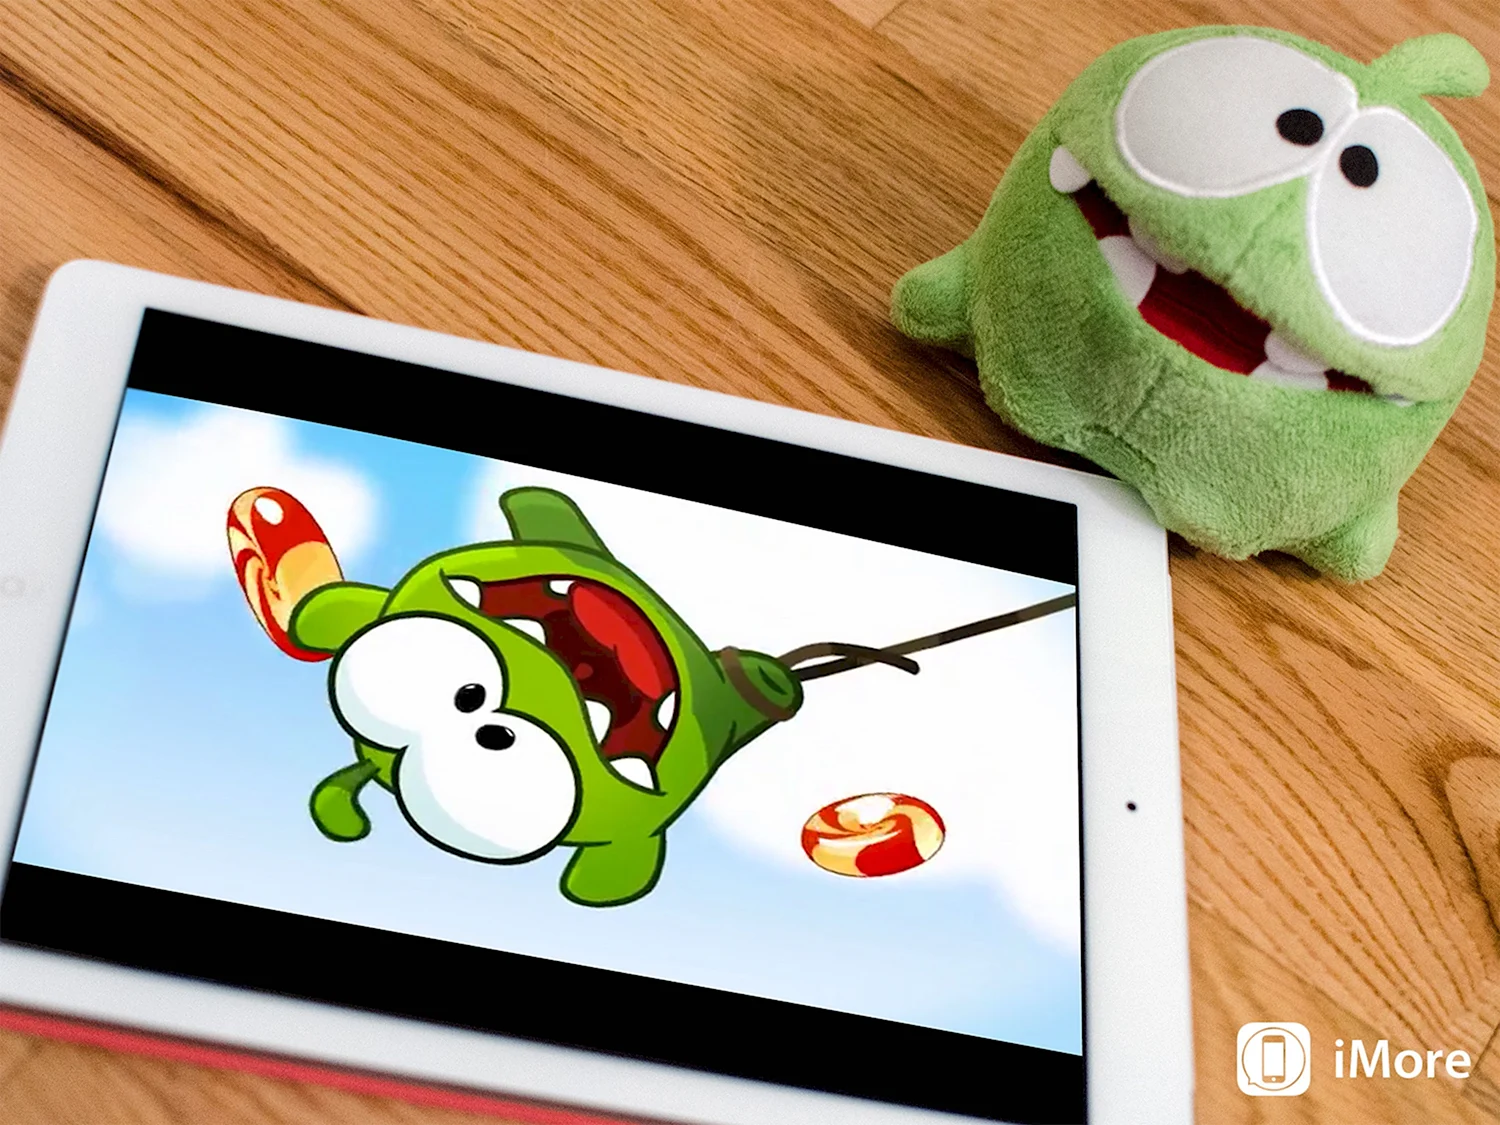 Cut the Rope apps like Tinder